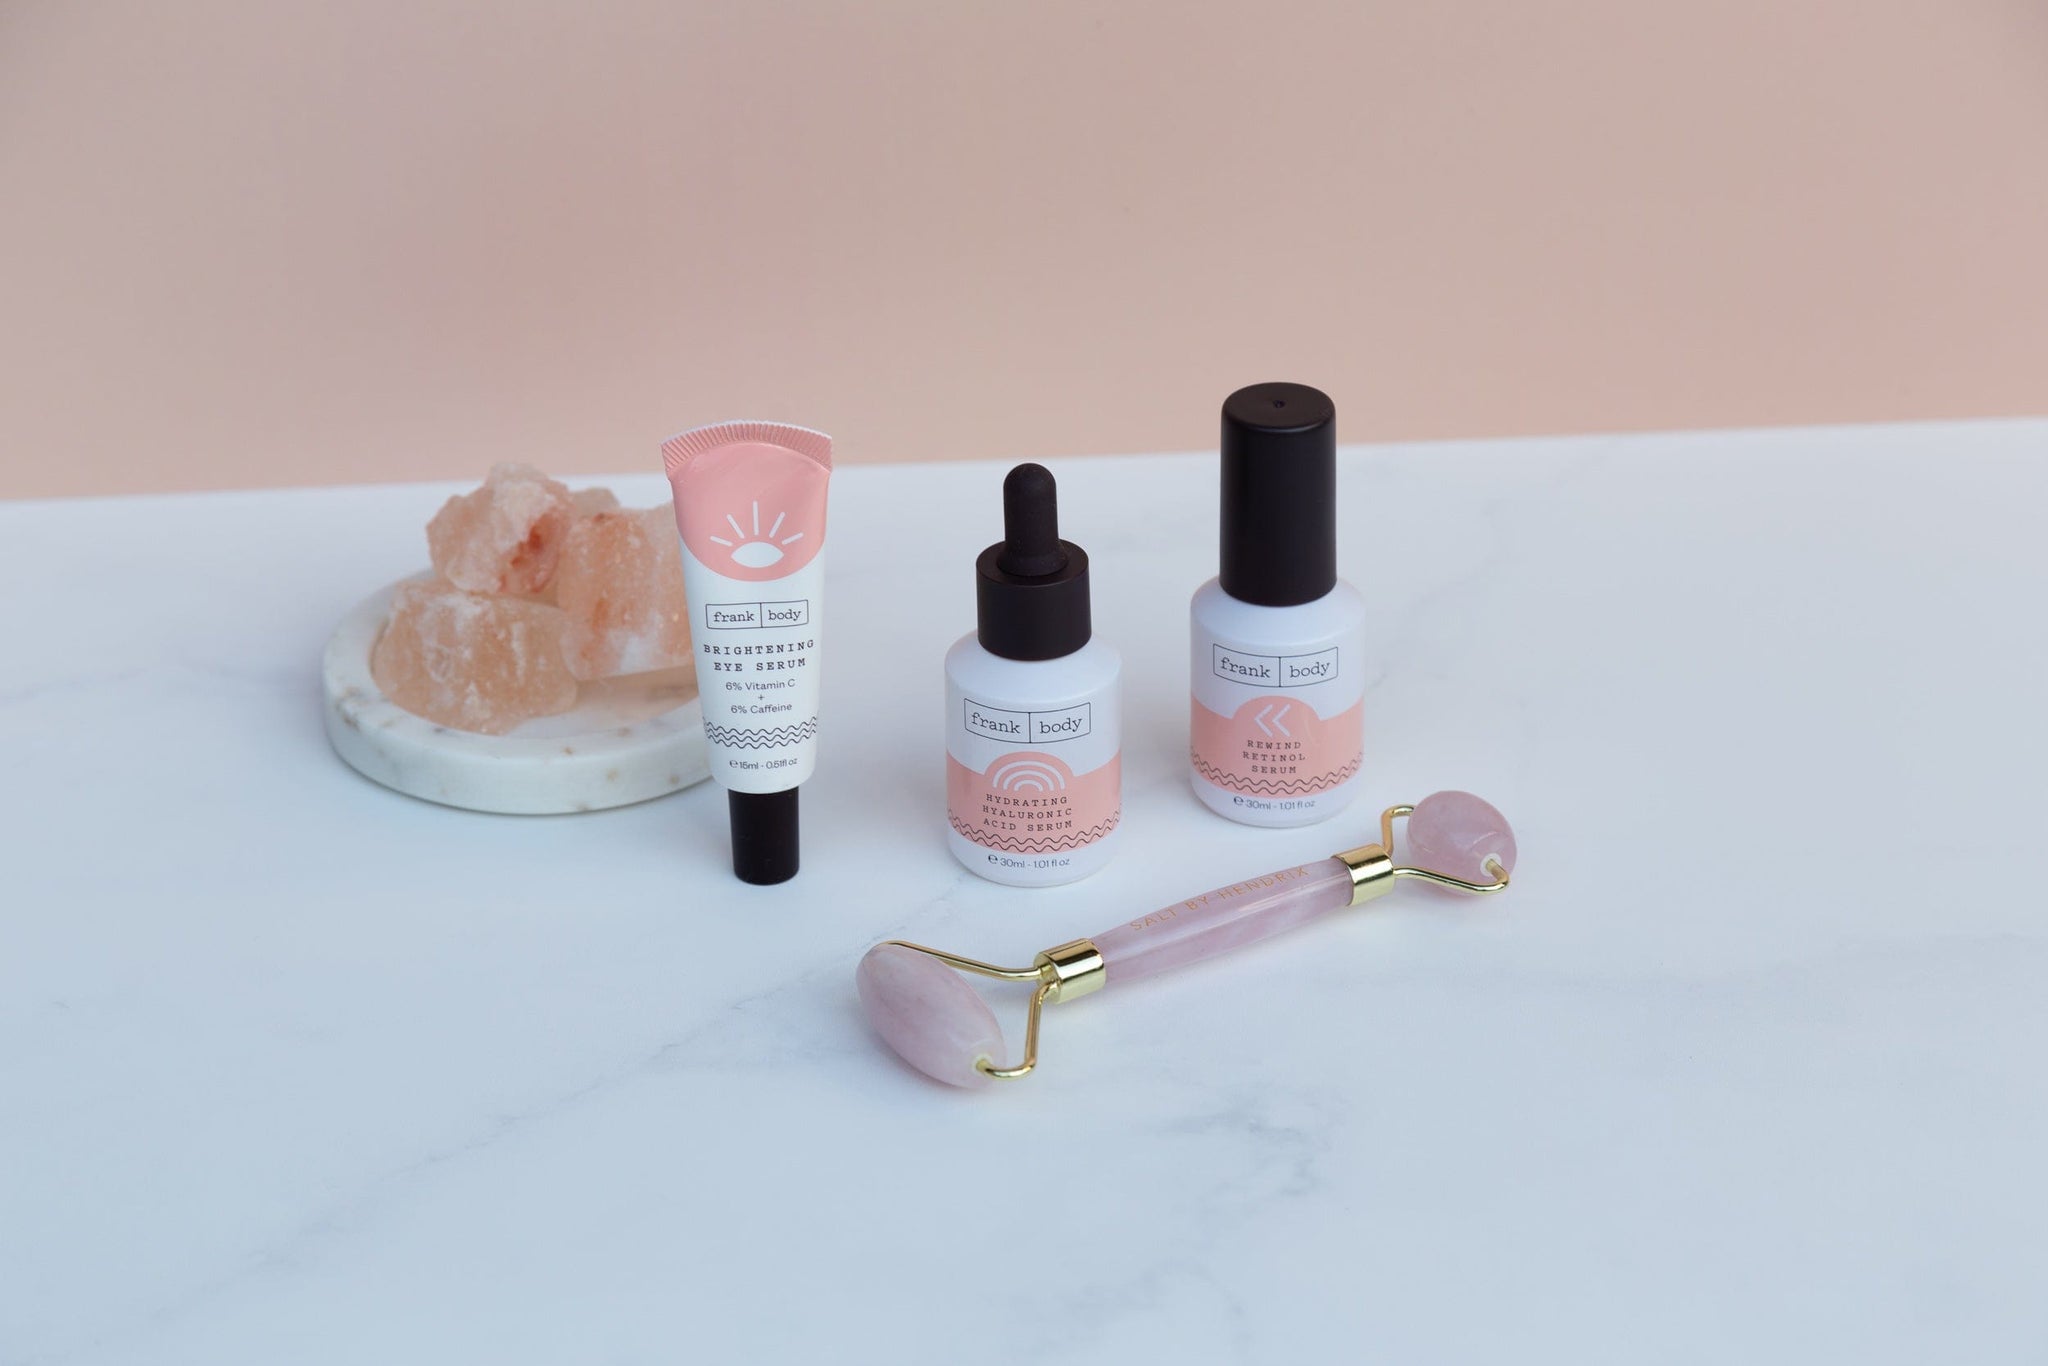 frank body skincare products and rose quartz roller photographed on granite marble double-sided vinyl photography backdrop - backdrop collective australia